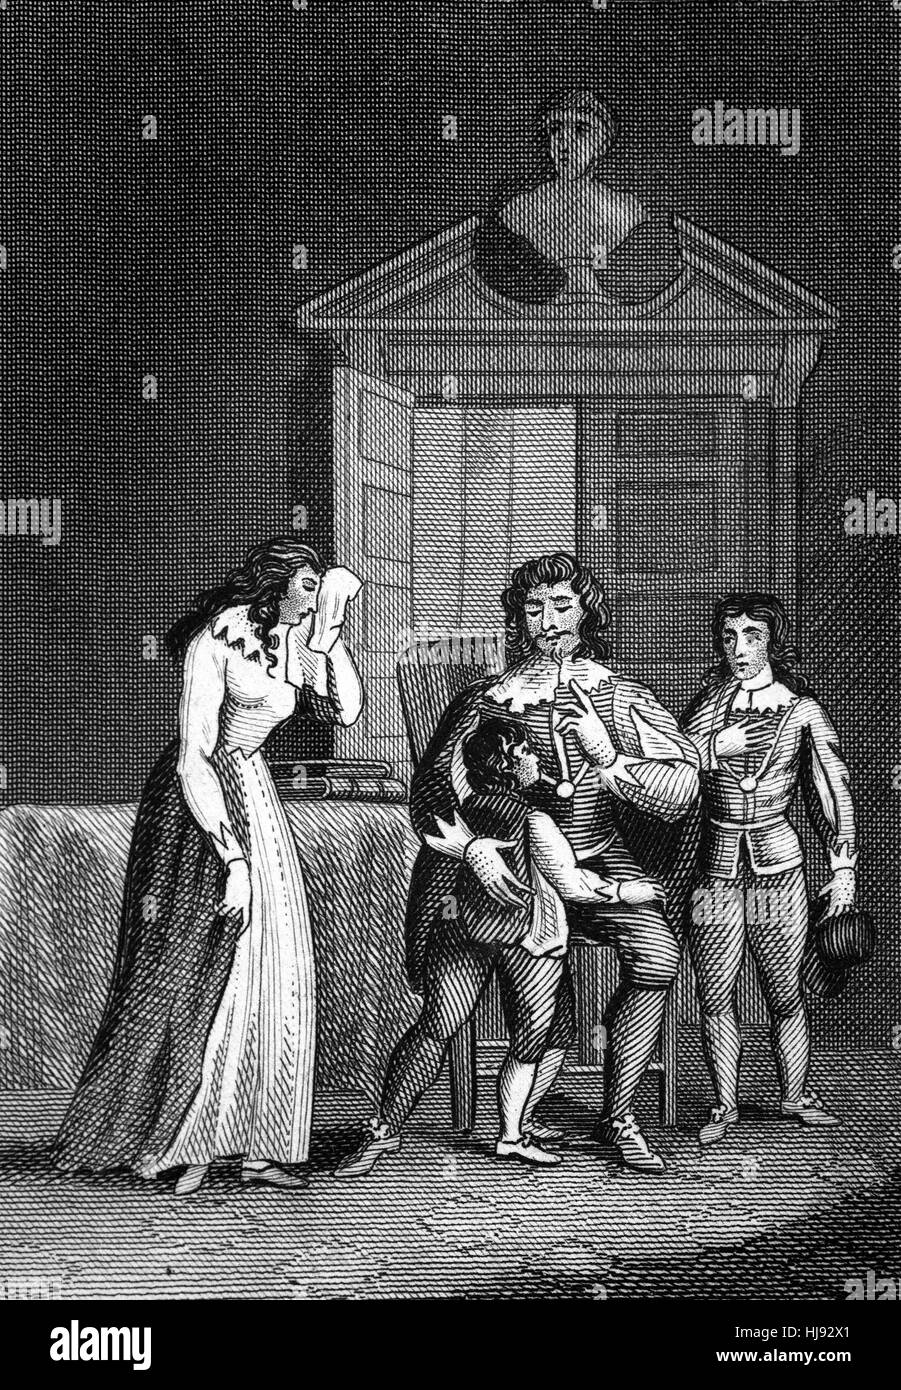 The beheading of King Charles I (1600 – 1649) was scheduled for Tuesday, 30 January 1649. Two of his children were permitted to visit him on 29 January and he bade them a tearful farewell. After his death they remained in England under the control of the Parliamentarians. Stock Photo